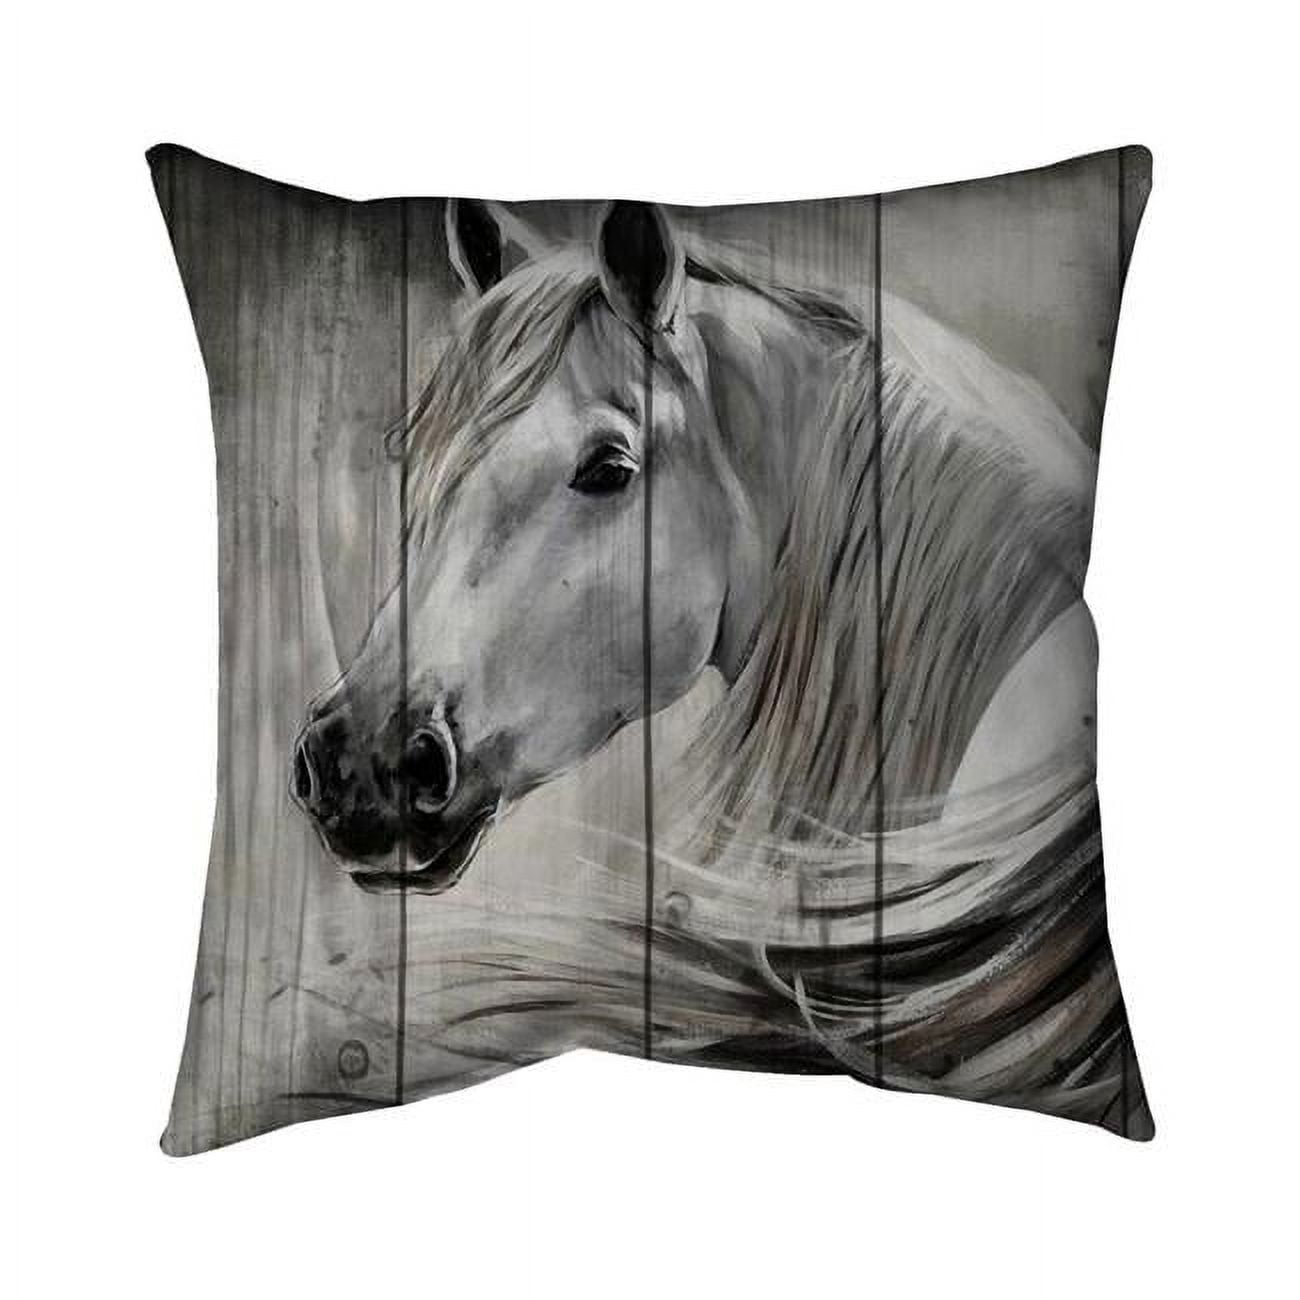 Begin Home Decor 5543-2626-AN10 26 x 26 in. Rustic Horse-Double Sided Print Indoor Pillow Cover